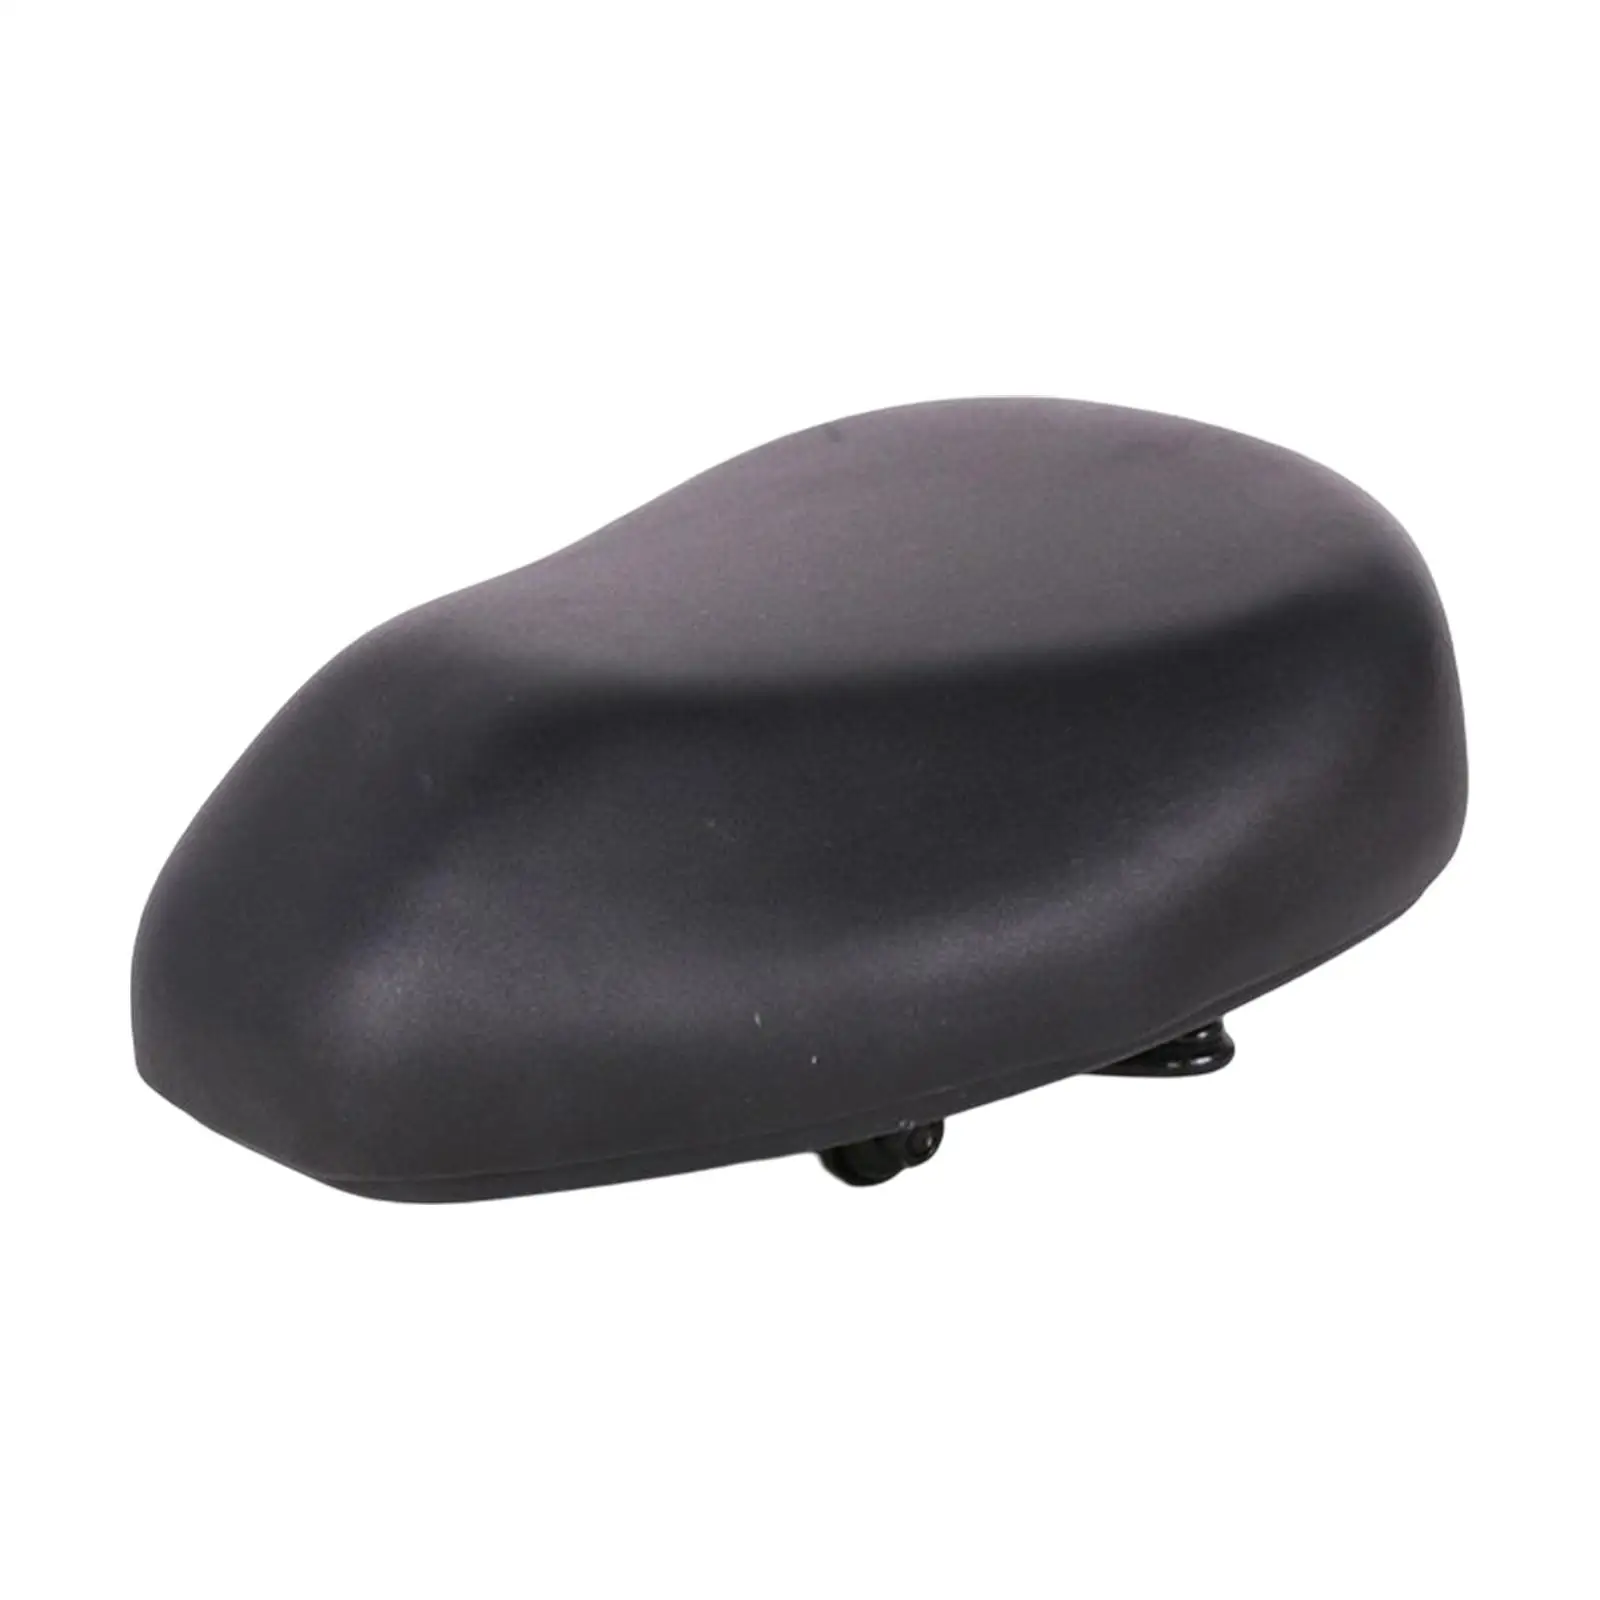 Bike Seat Cushion Saddle Wide Comfortable Firm Fit for Electric Scooter